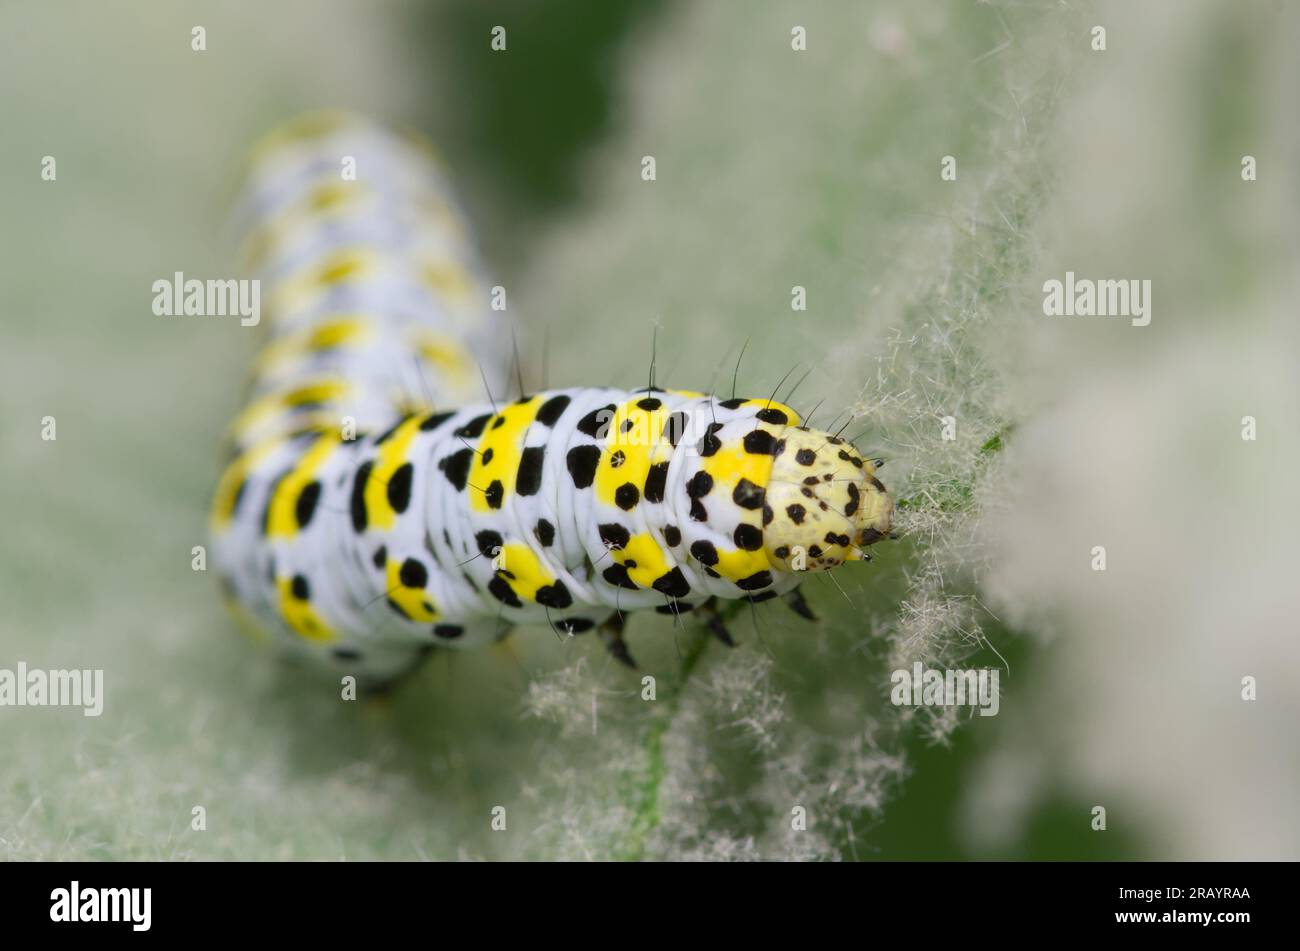 Caterpillar Of The Mullein Moth, Cucullia verbasci. Feeding On The Hairy Leaf Of The Mullein Plant, Verbascum thapsus , New Forest UK Stock Photo